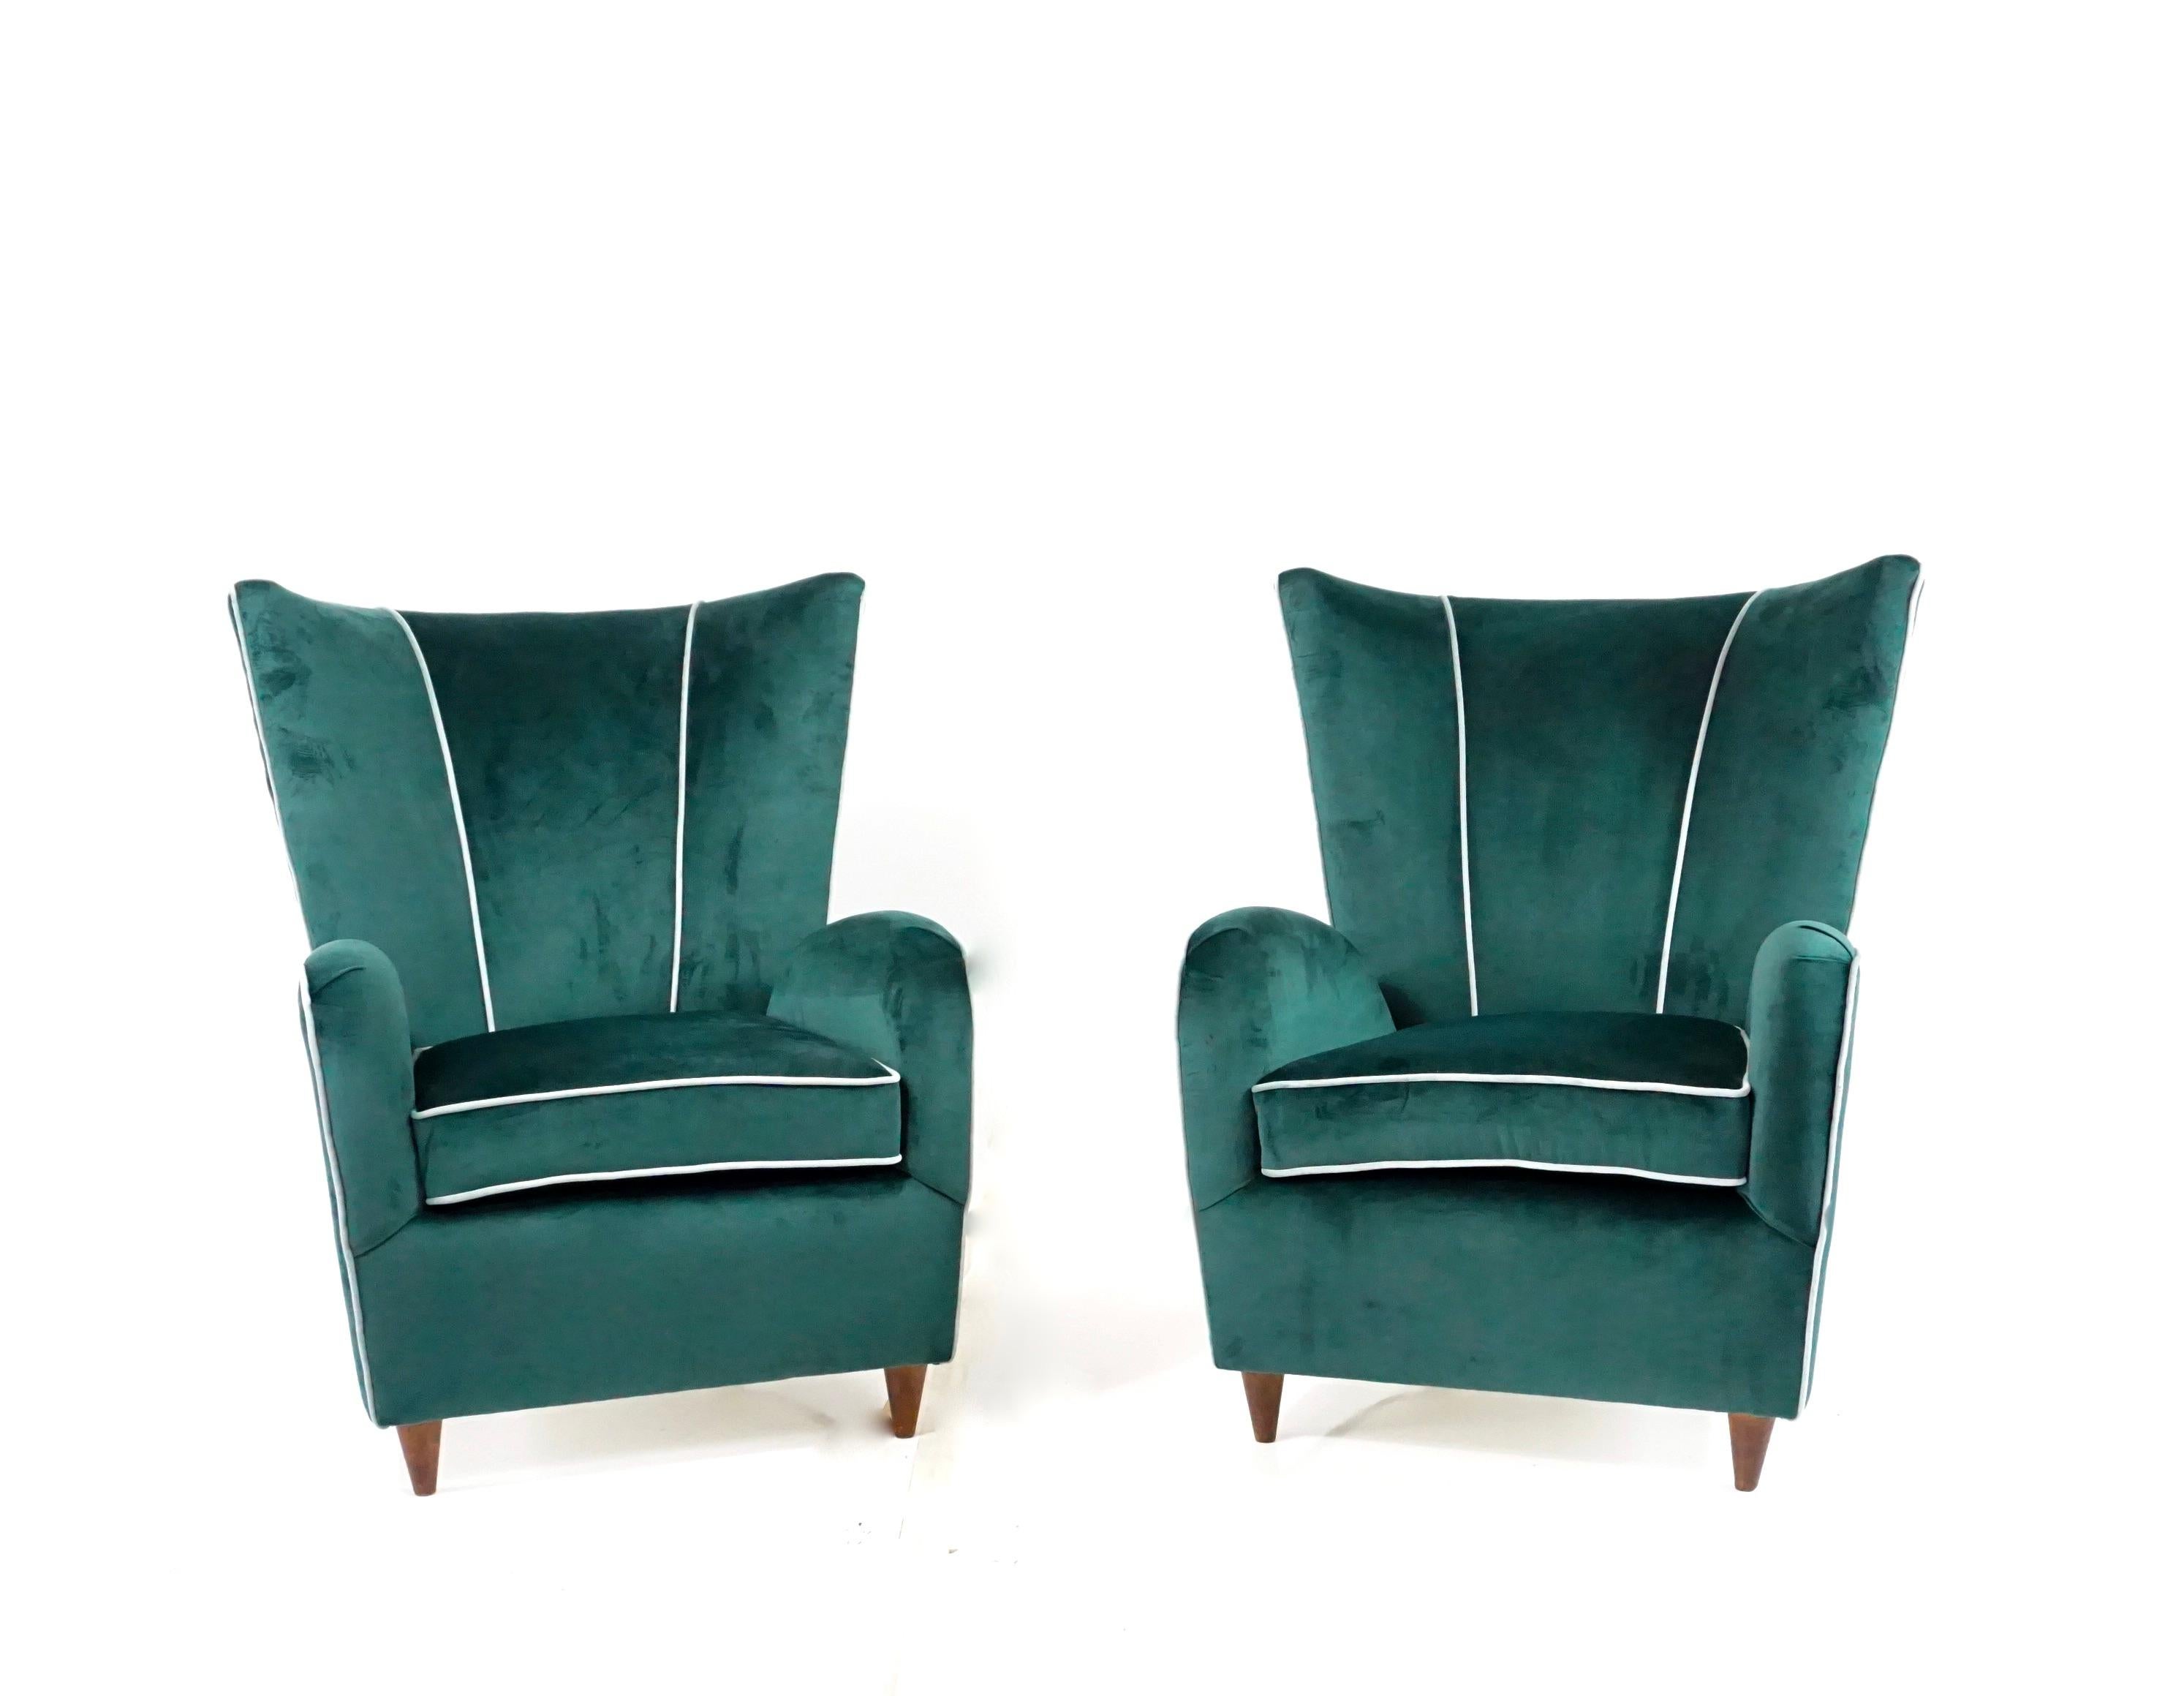 pair of rare green wing back armchairs by Paolo Buffa circa 1959
directly from the original forniture of the Hotel Bristol, Merano

re-upholstery in green velvet and mint velvet  cord
wood feet
very good condition

Measures: 72 x 7o cm ; height 92